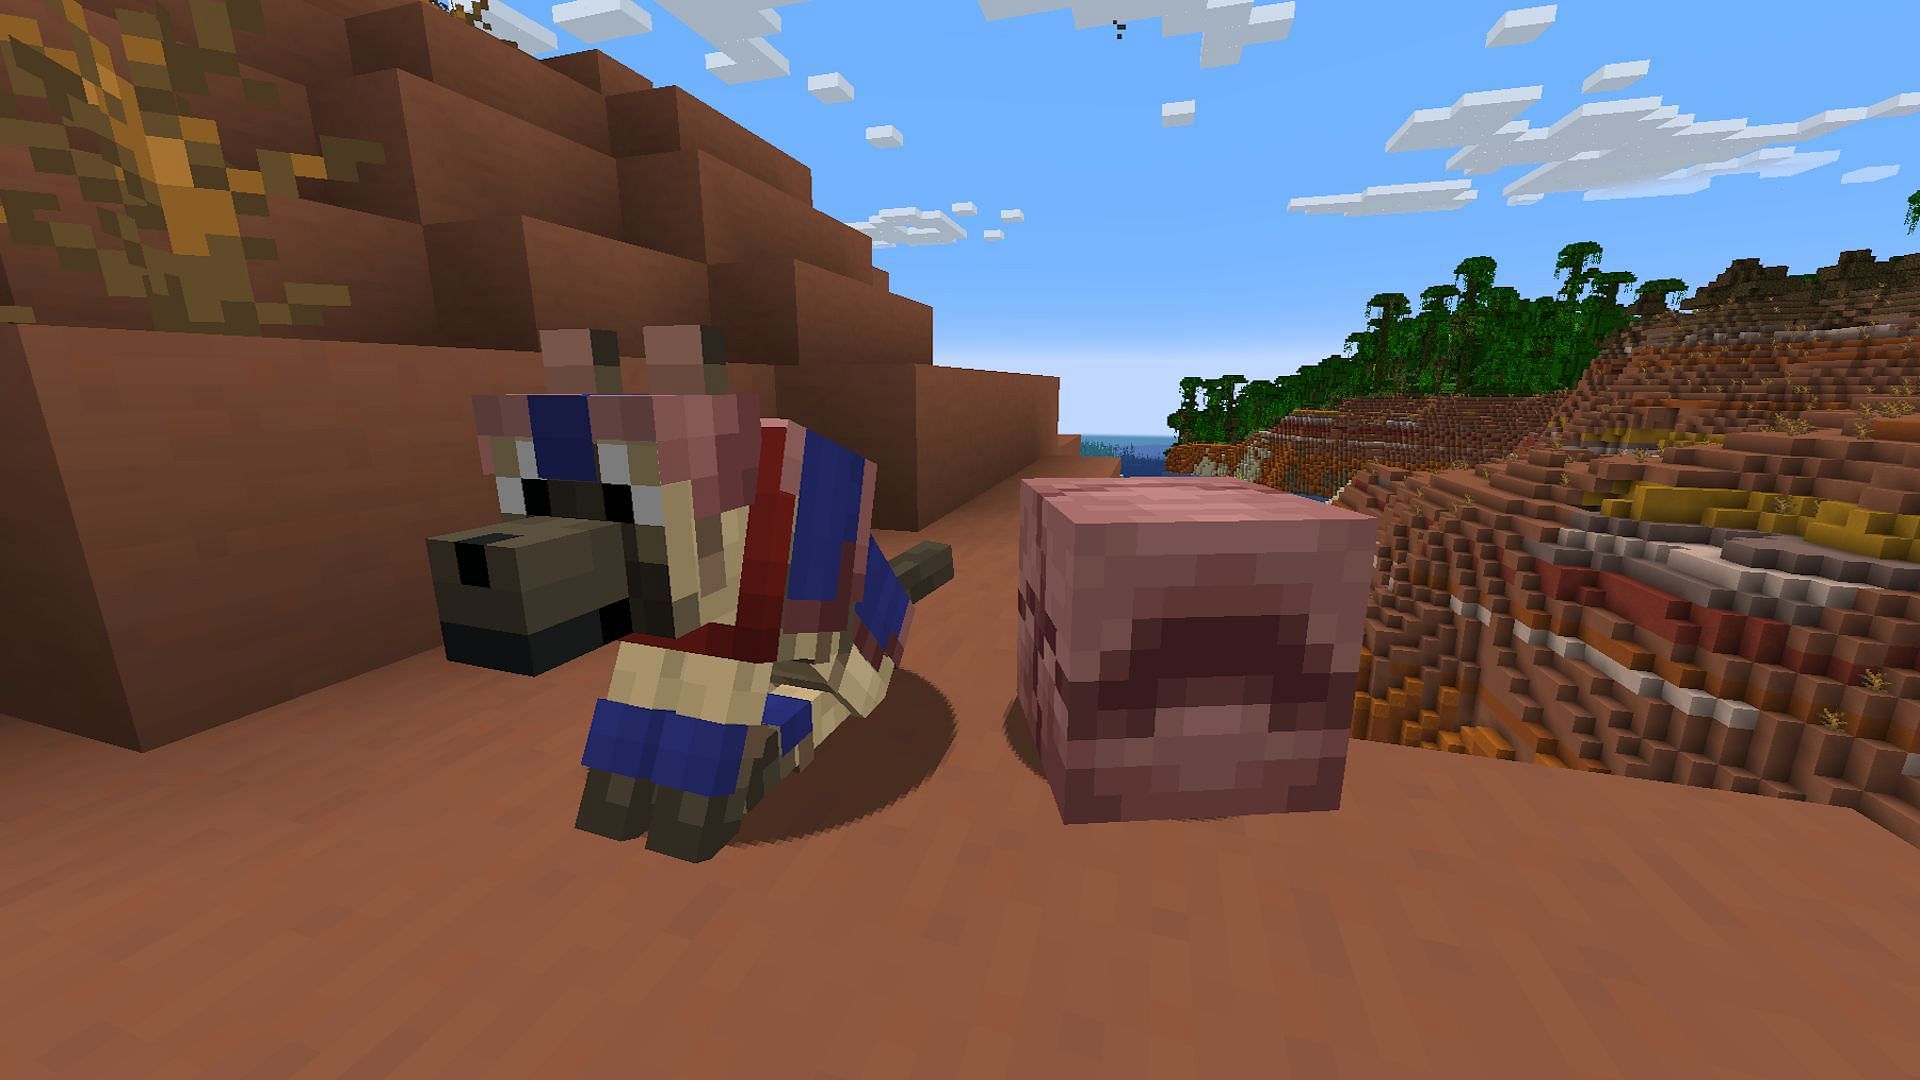 Wolves should be left sitting when not actively out adventuring to stay safe. (Image via Mojang)